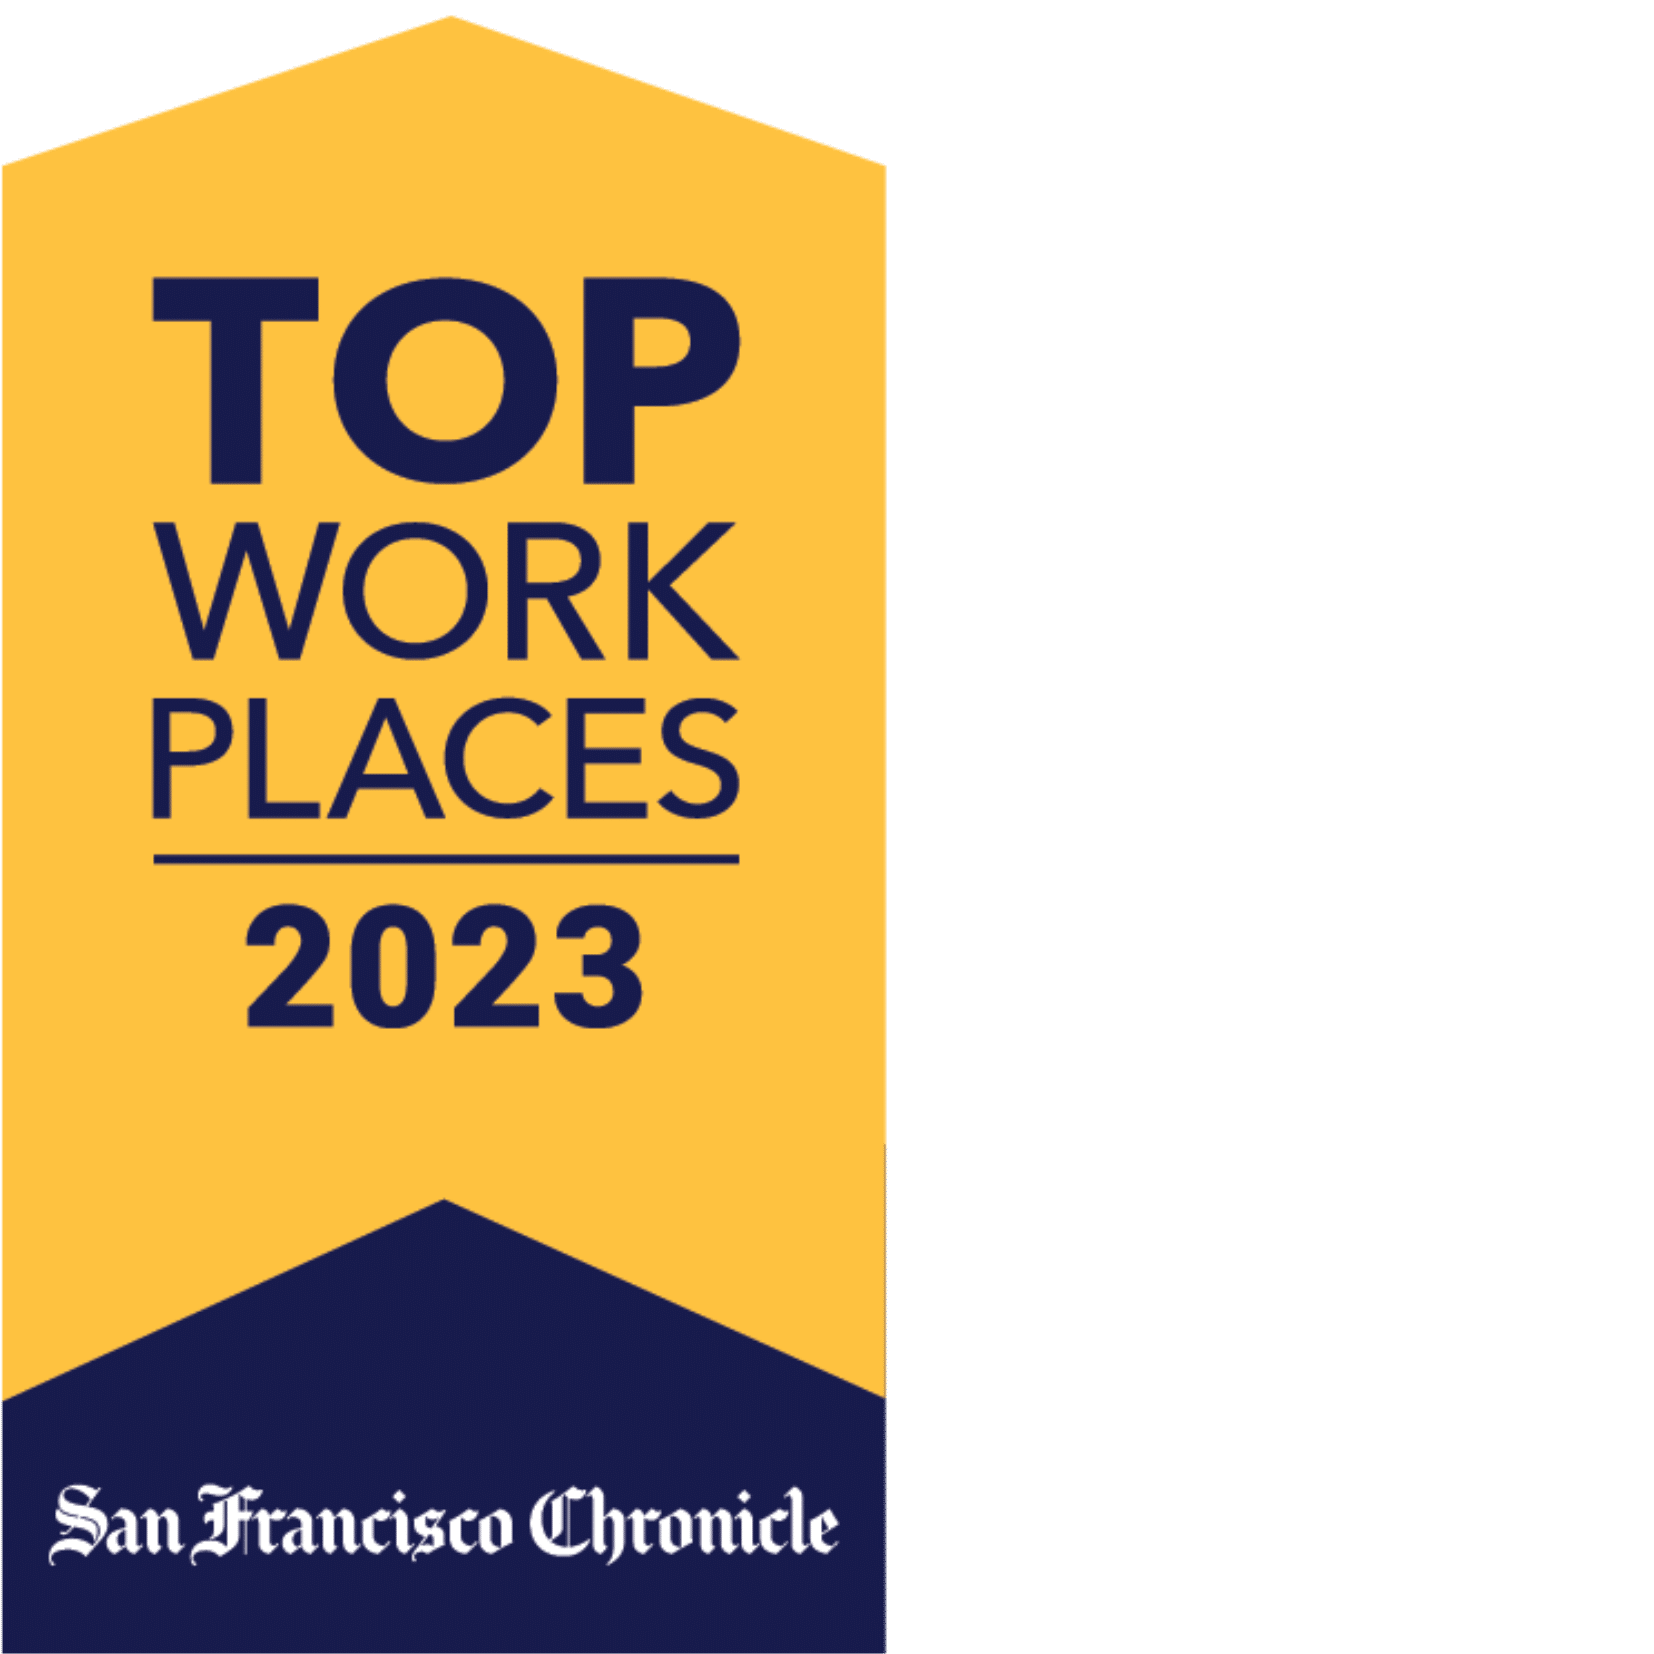 graphic reads, "Top Workplaces 2023" with San Francisco Chronicle logo pictured below.